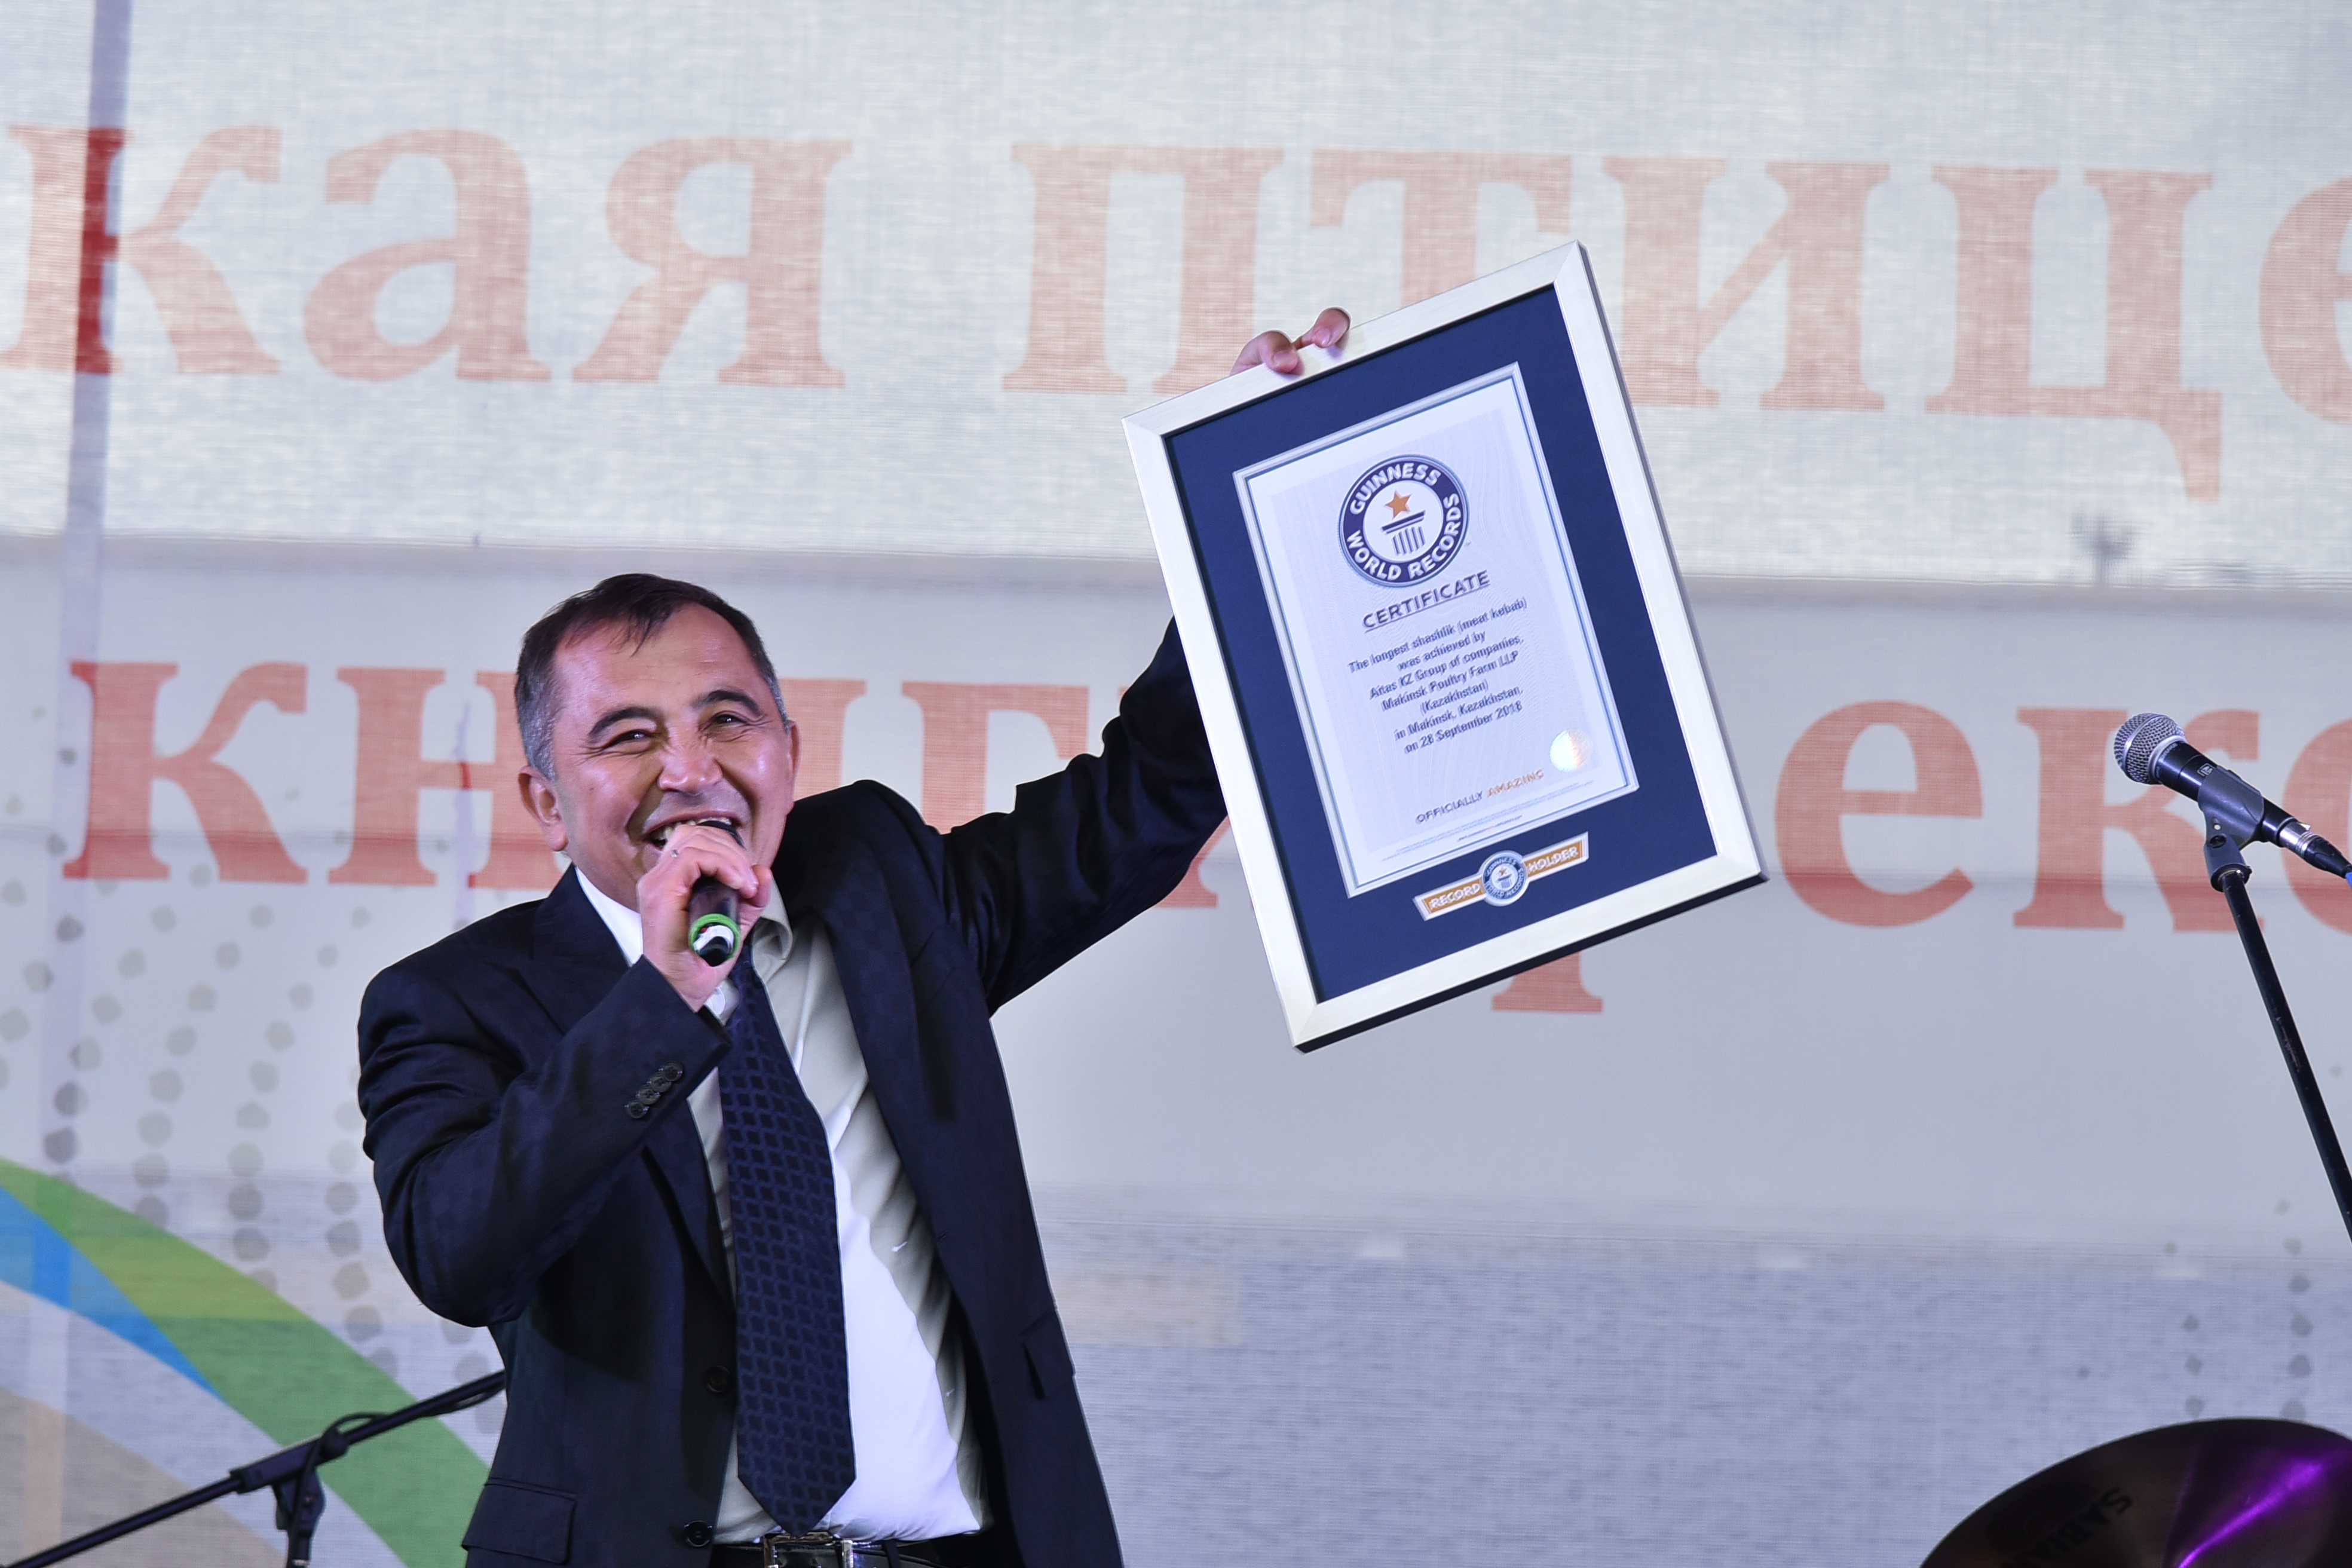 The employees of Makinsk Poultry Farm have established a new world record